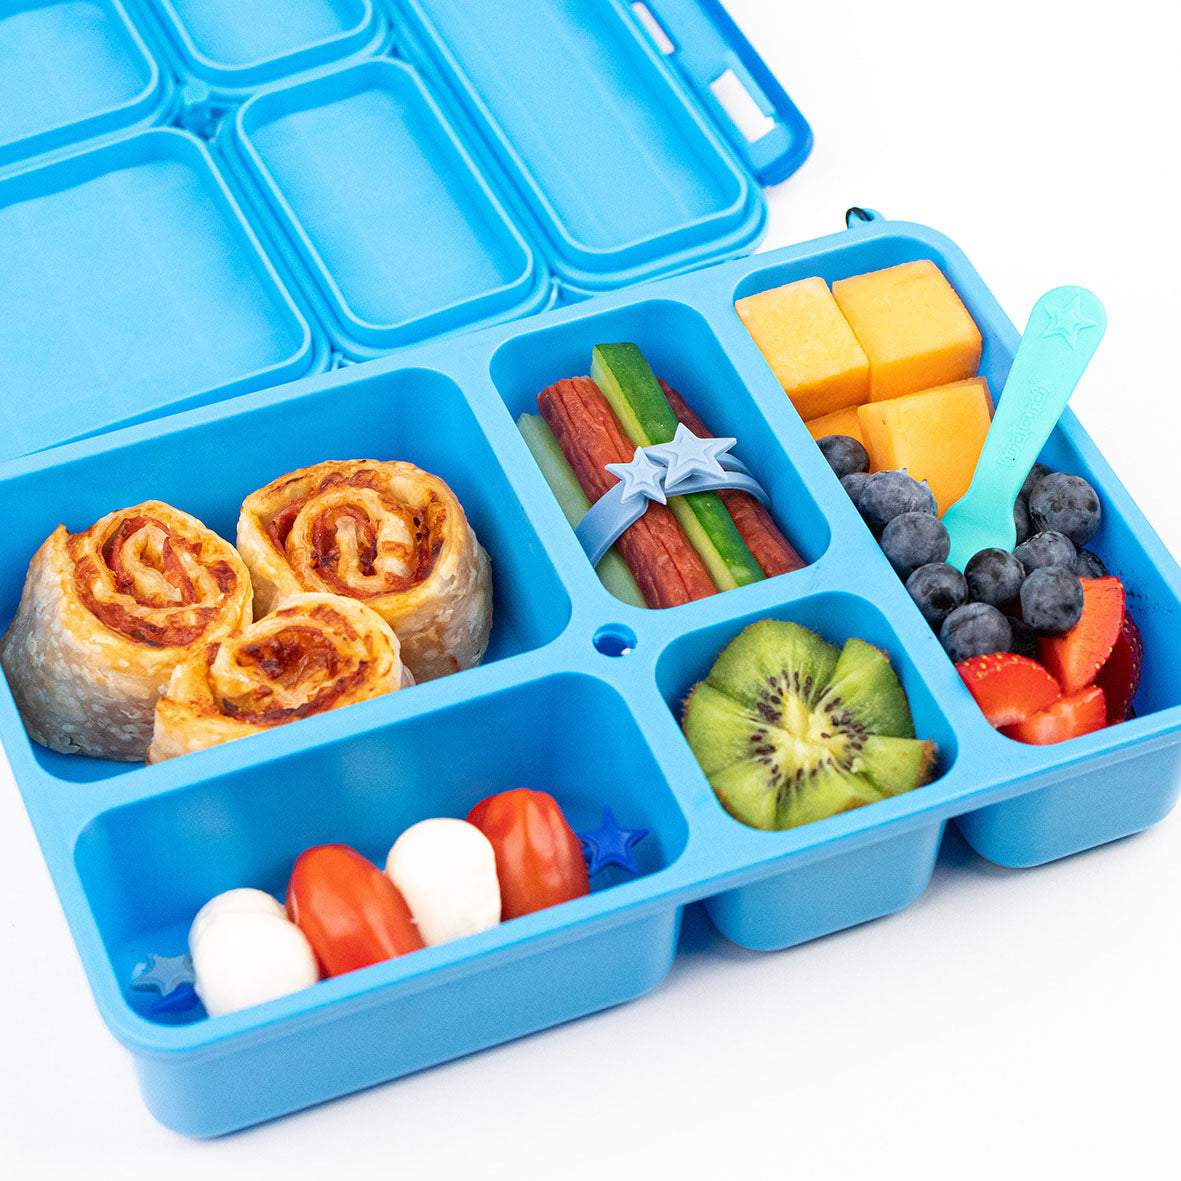 A blue bento style lunch box filled with food using The Lunch Punch food accessories.